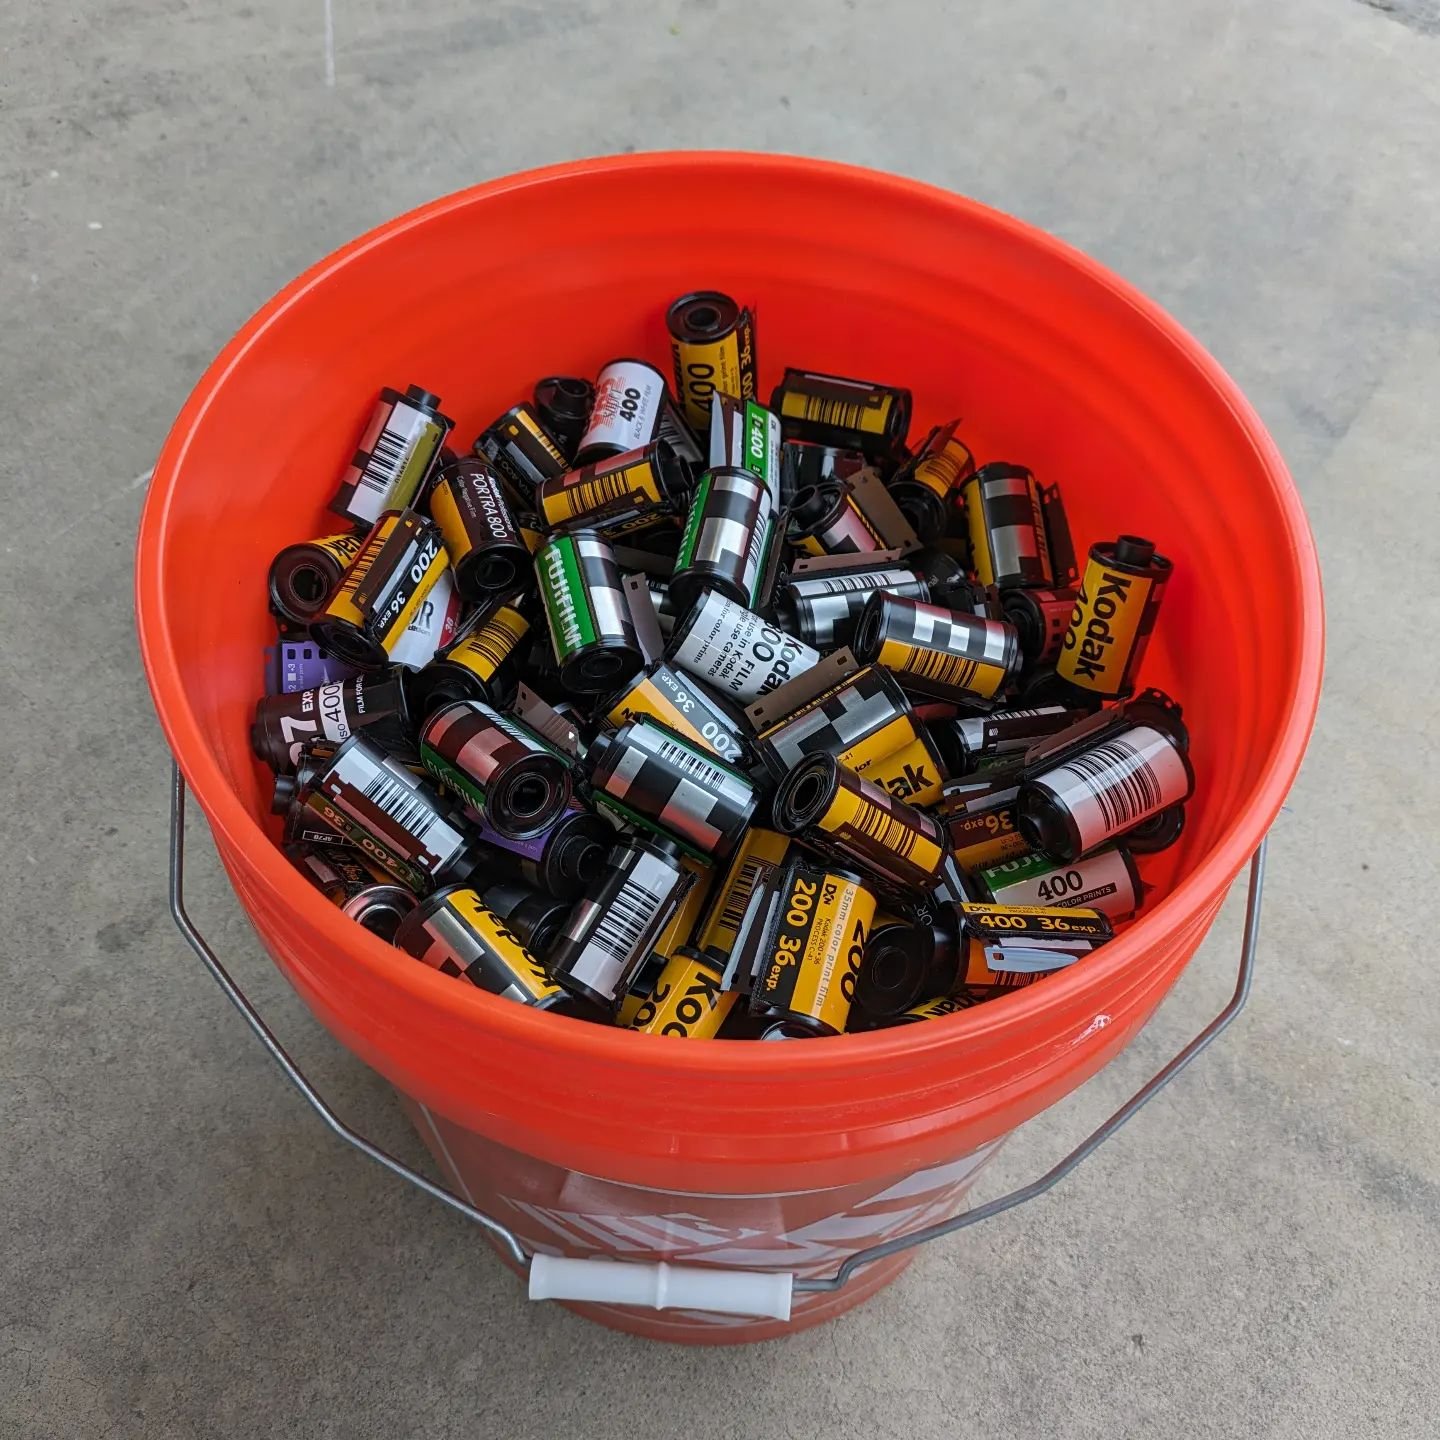 5 Gal bucket of empty canisters. This should do nicely for bulk loading. Thanks @essentialphotosupply and @acmecameraco for the supplies and film! #shootmorefilm #slcdarkroom